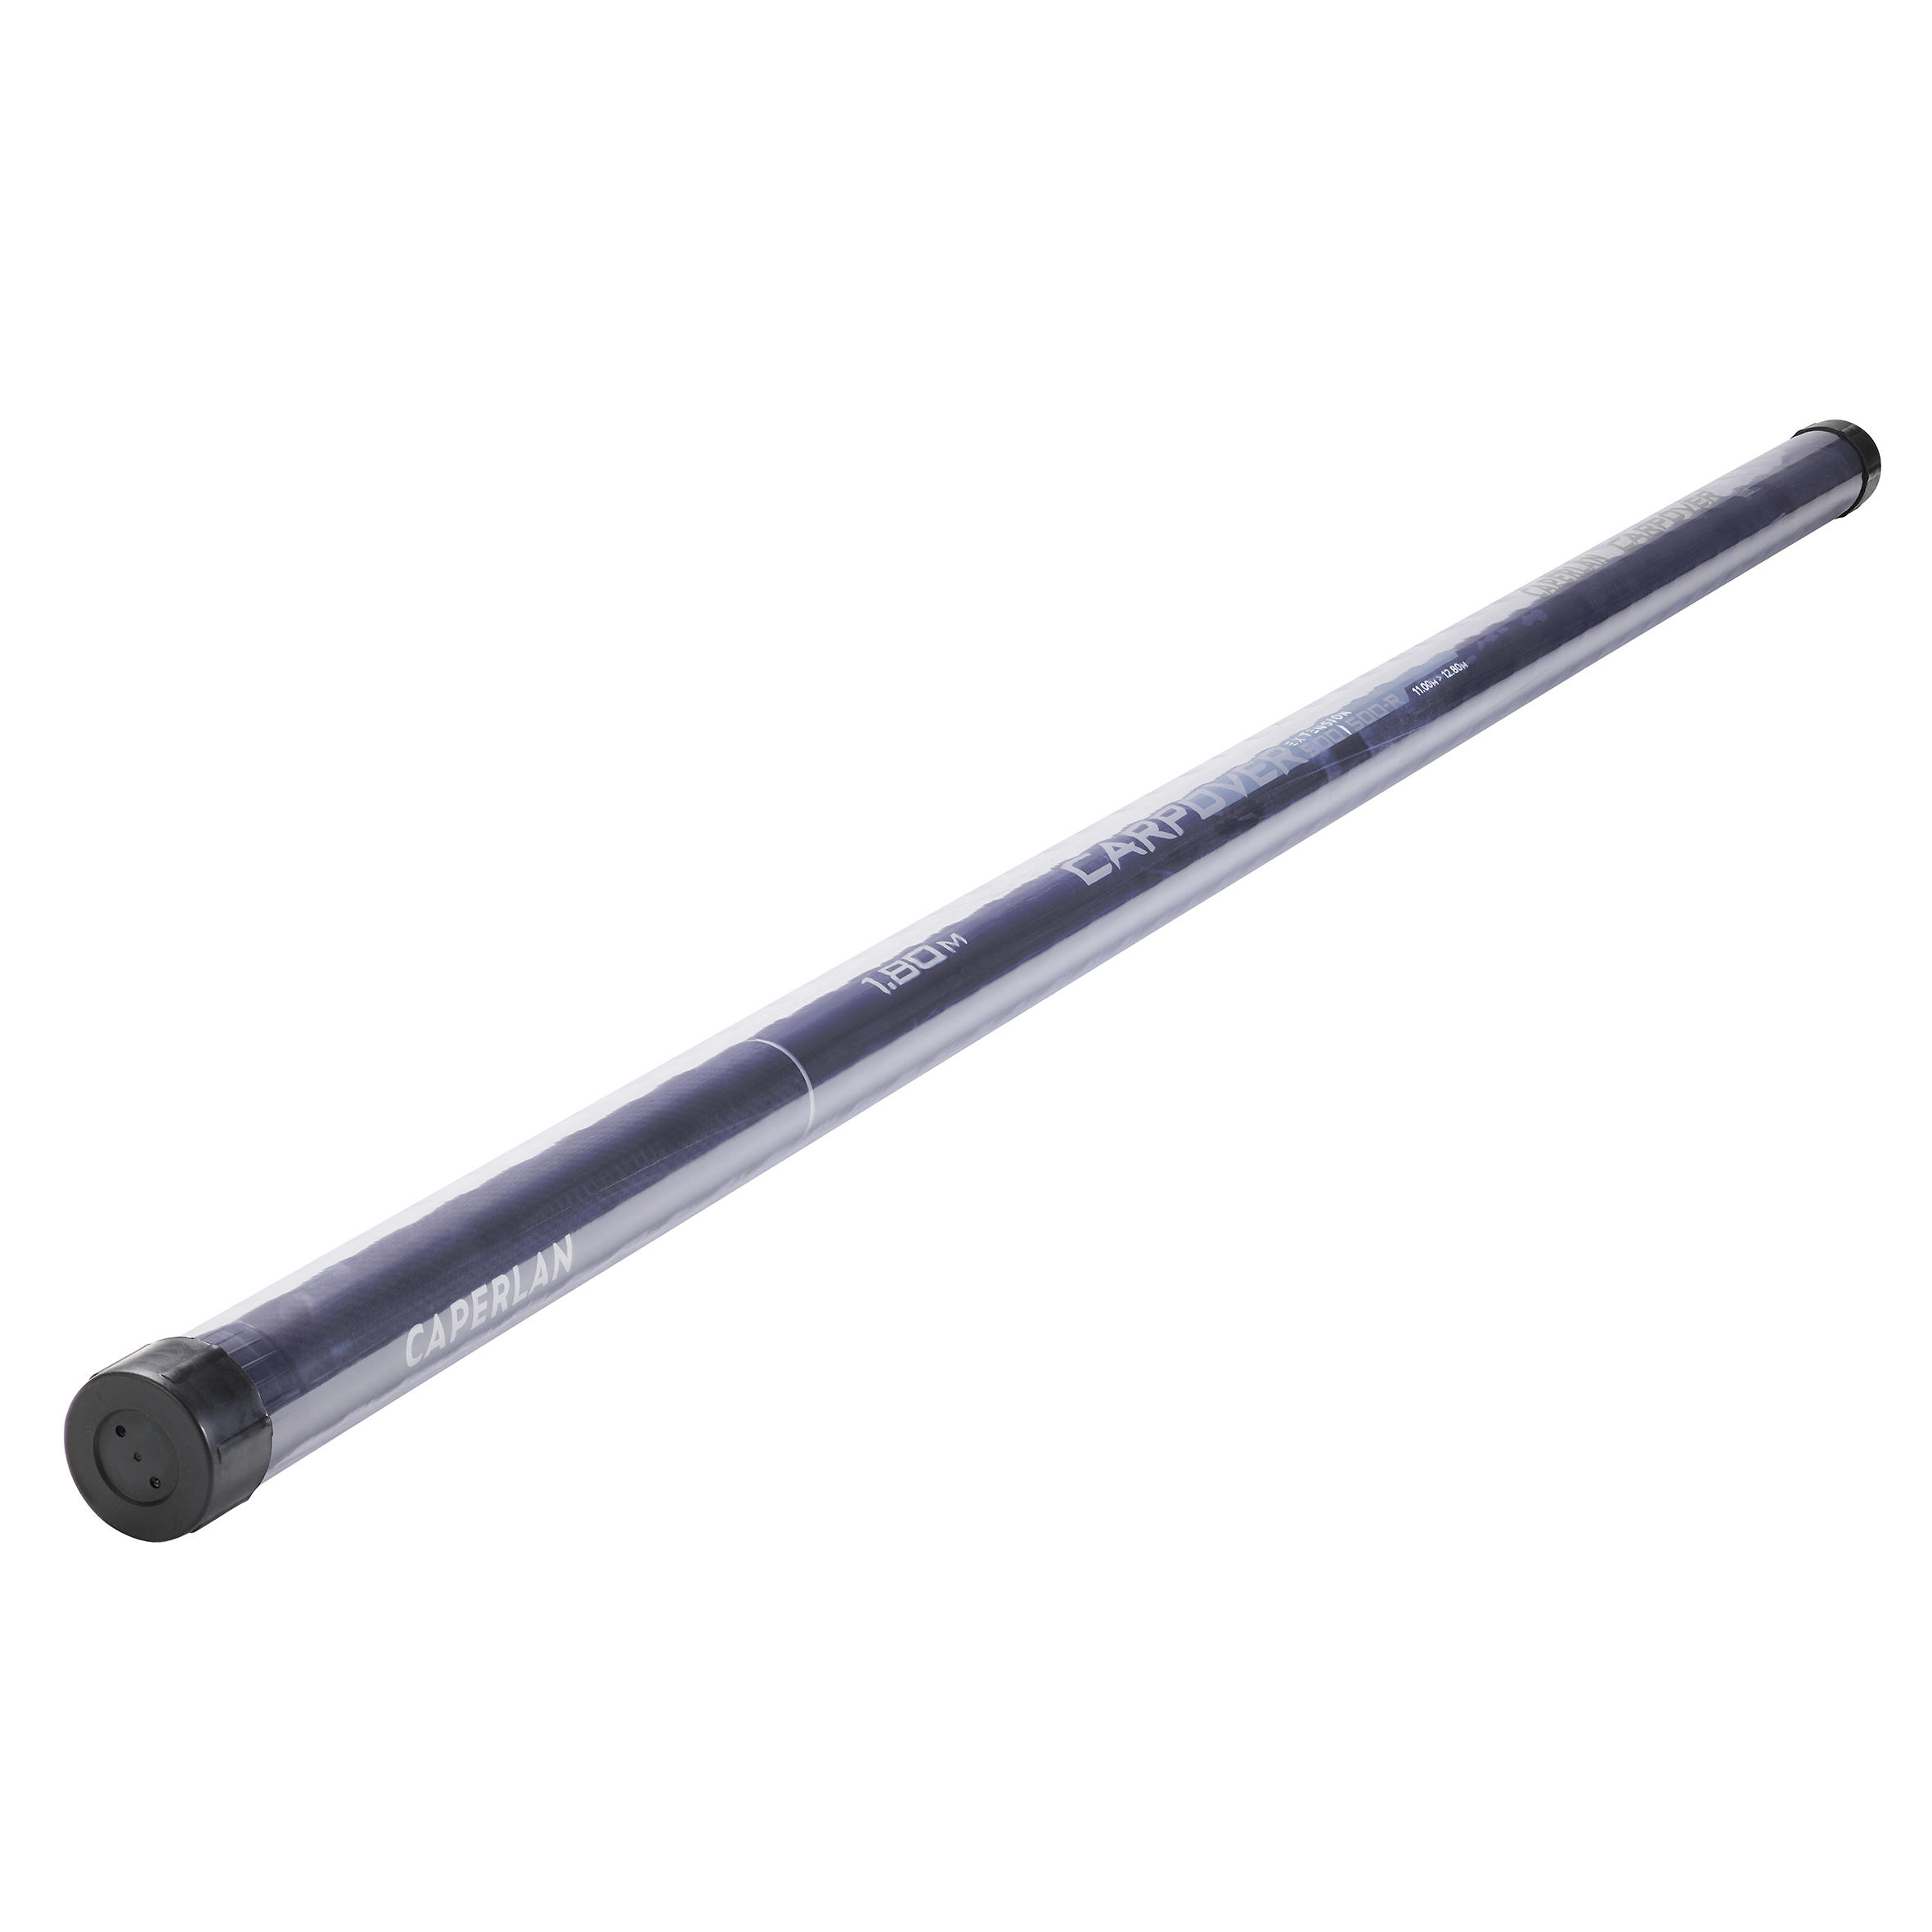 EXTENSION 1.8M  FOR RODS CARPOVER-500 AND 500R 3/7